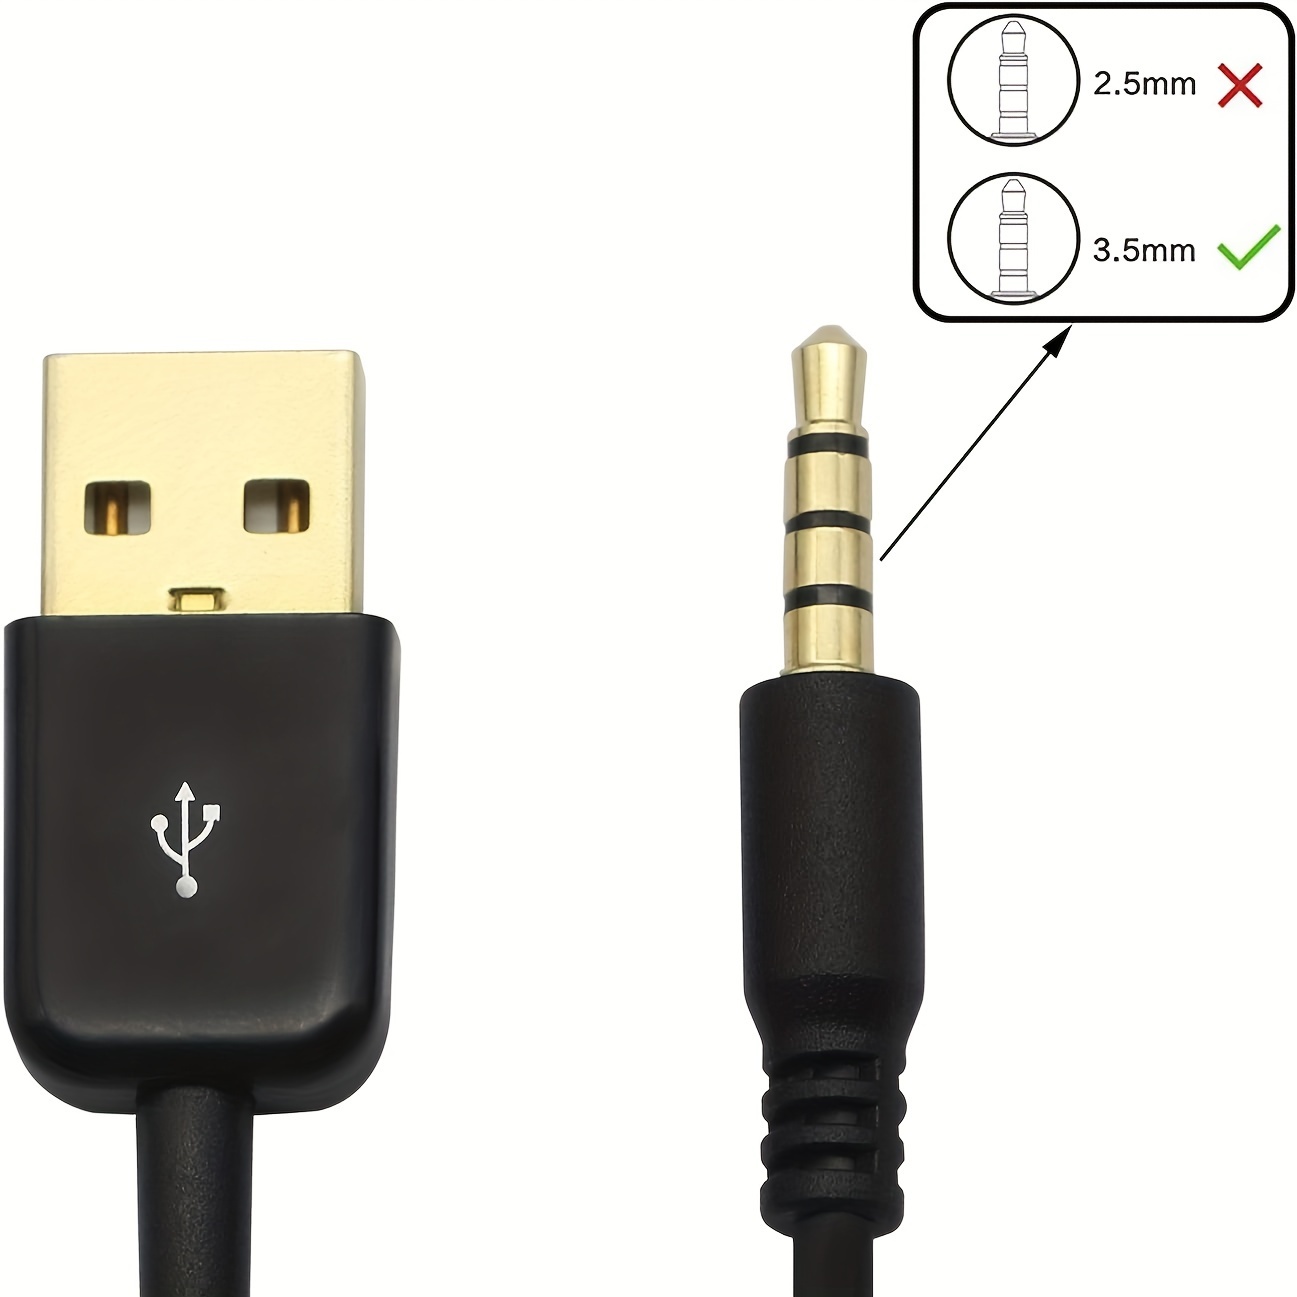 

3.5mm Charger Cable, Golden-plated 4 Pole 3.5mm Male To Usb 2.0 Male Charging Cable (1m/3.3feet).